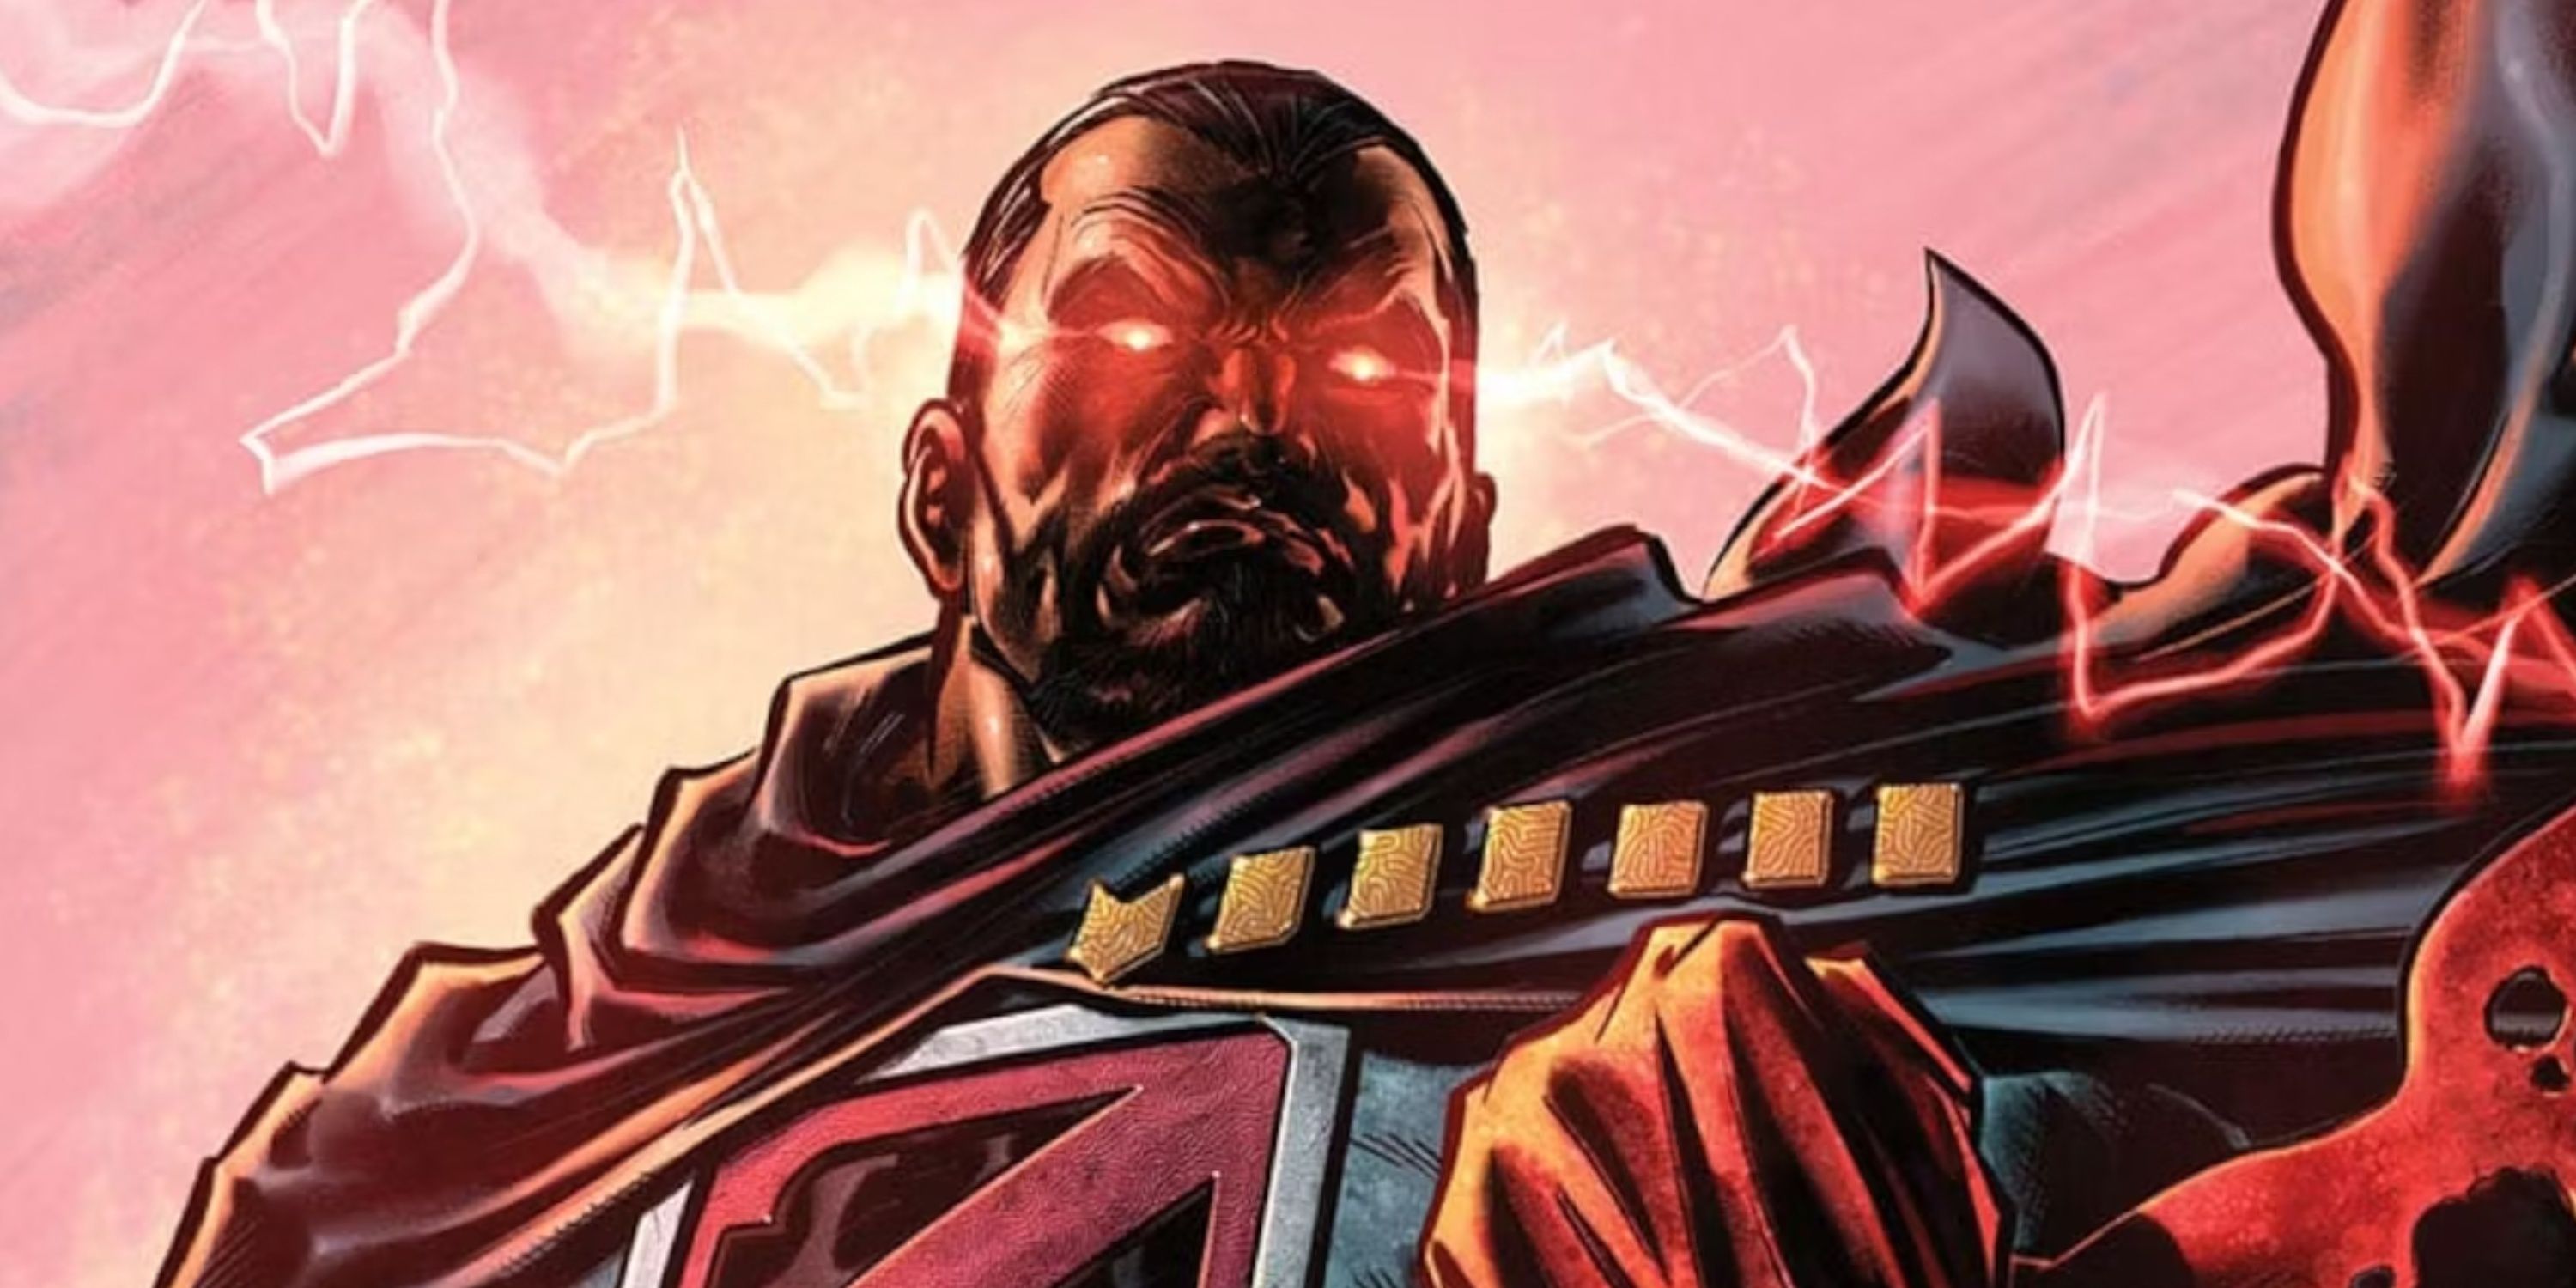 Superman villain General Zod radiates lasers from his eyes